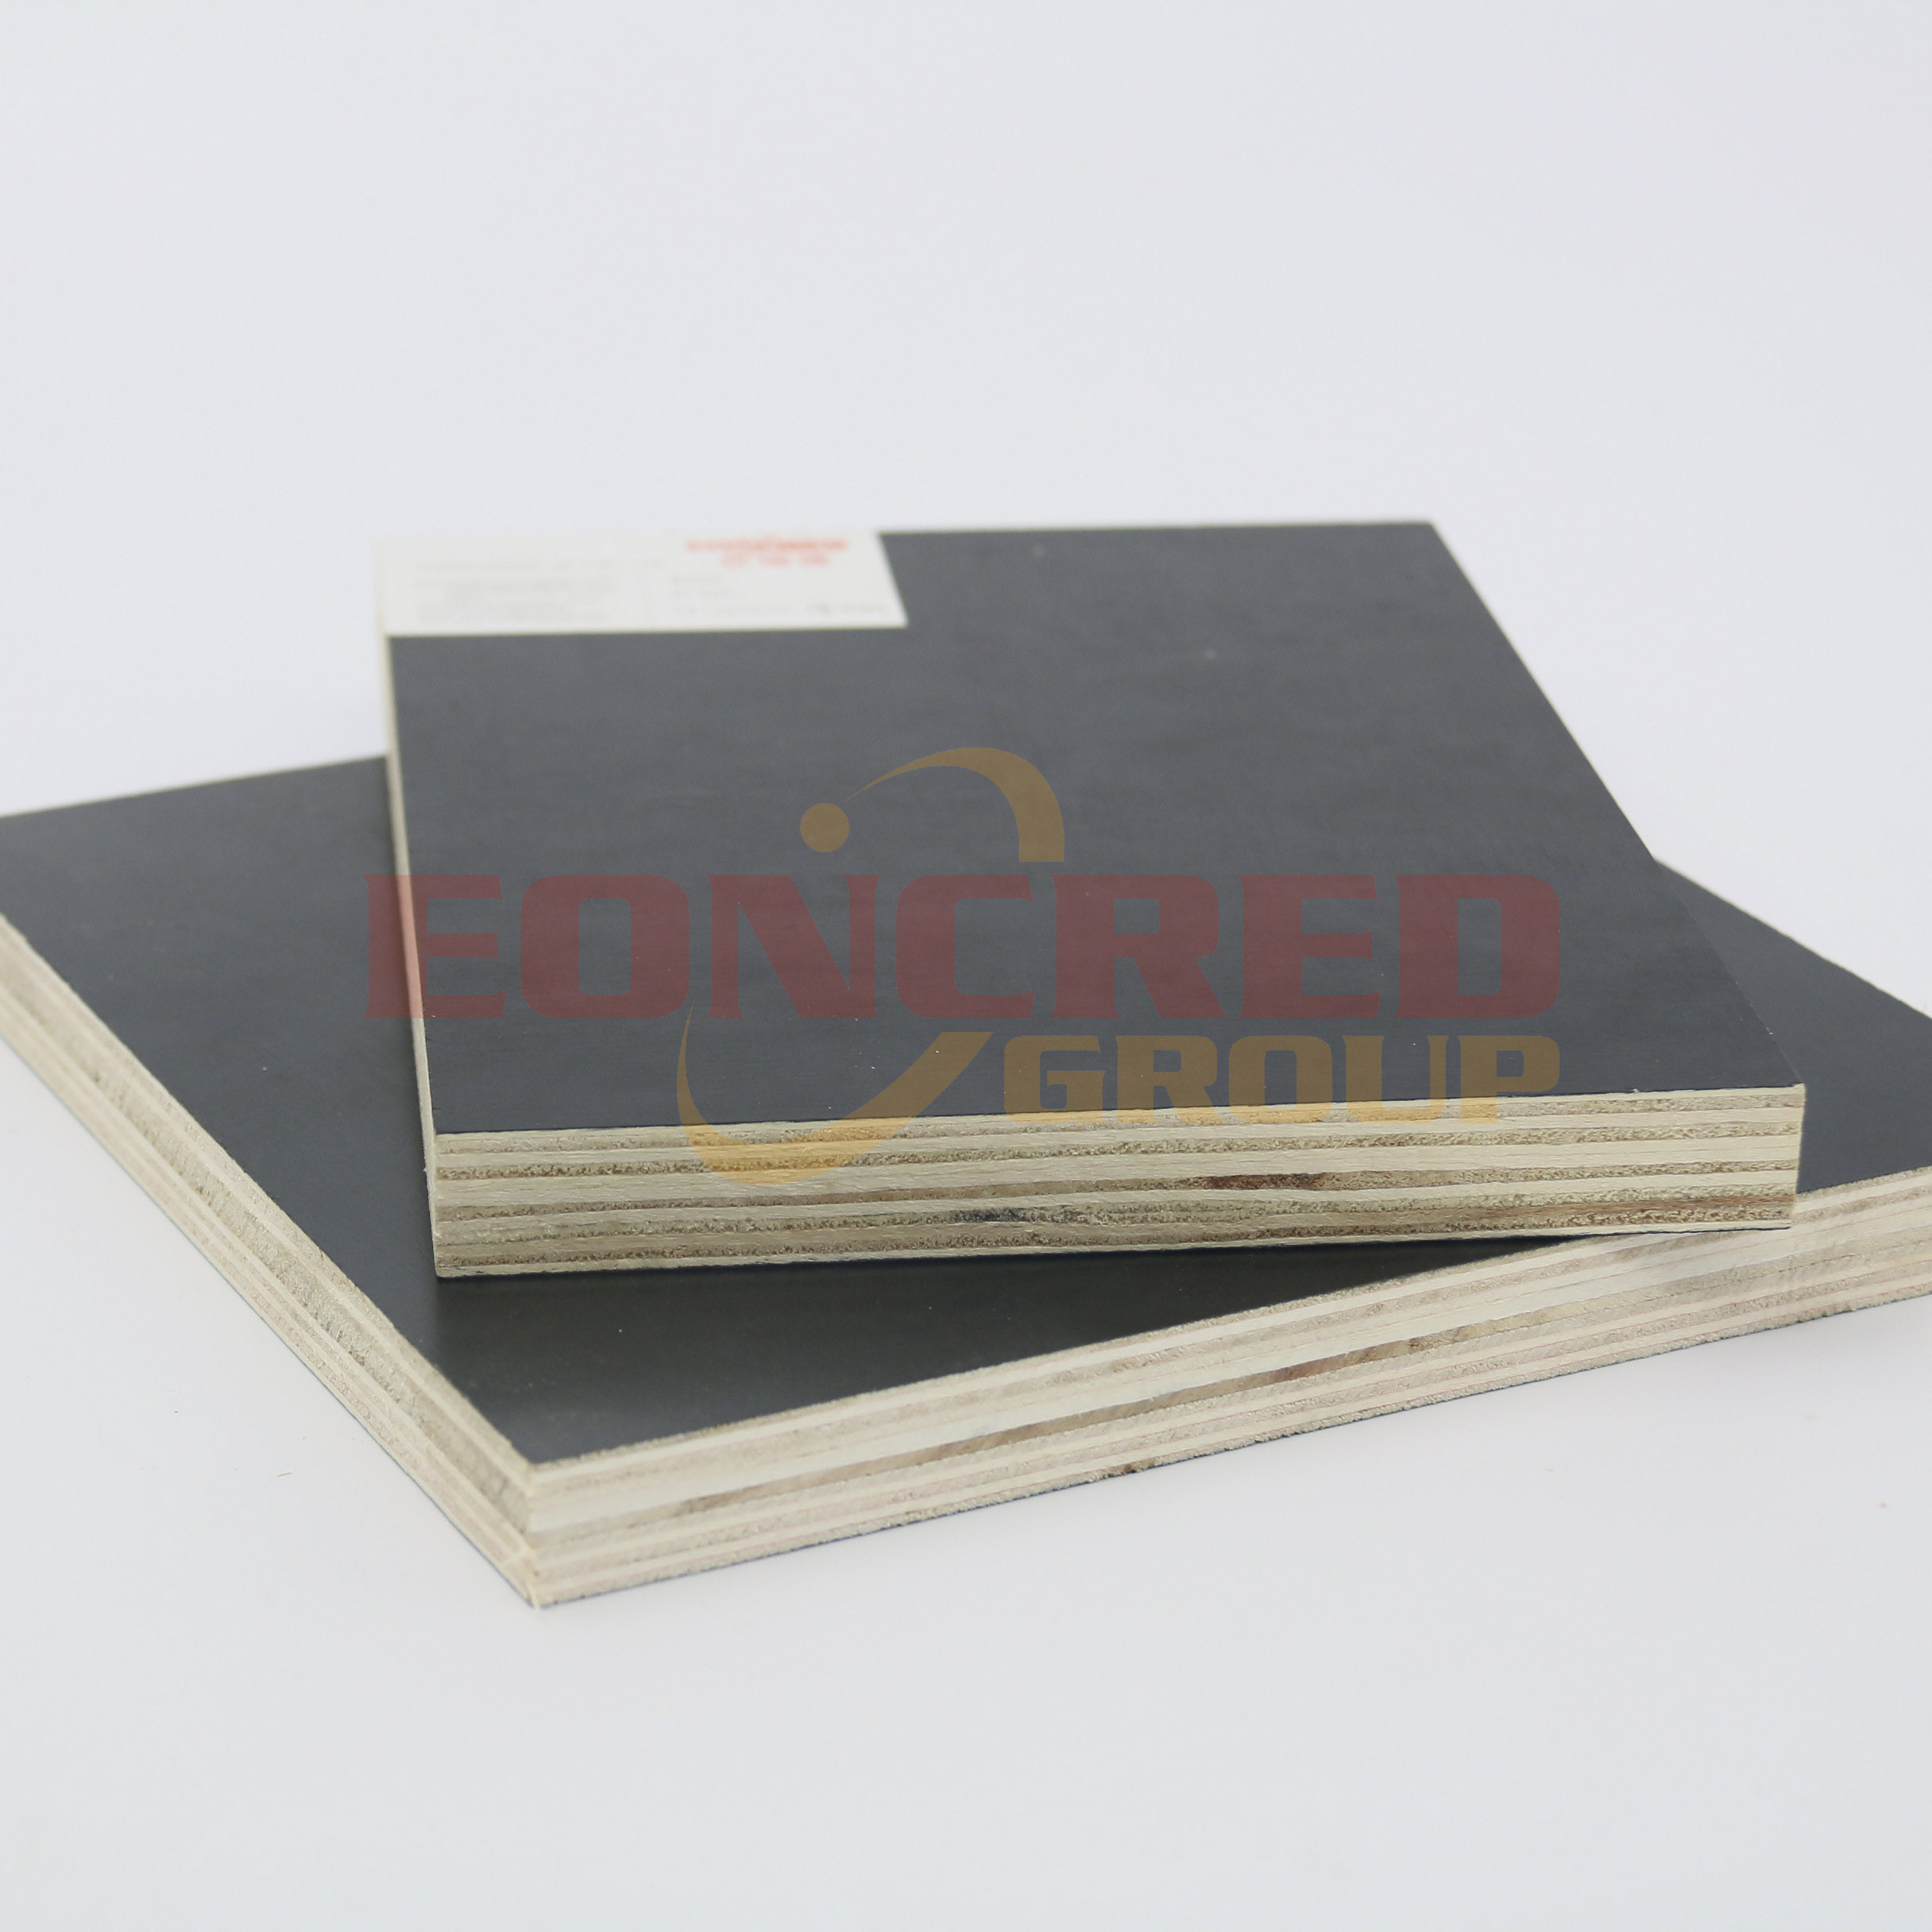 18mm Black Film Faced Plywood Construction/formwork Plywood Factory Price